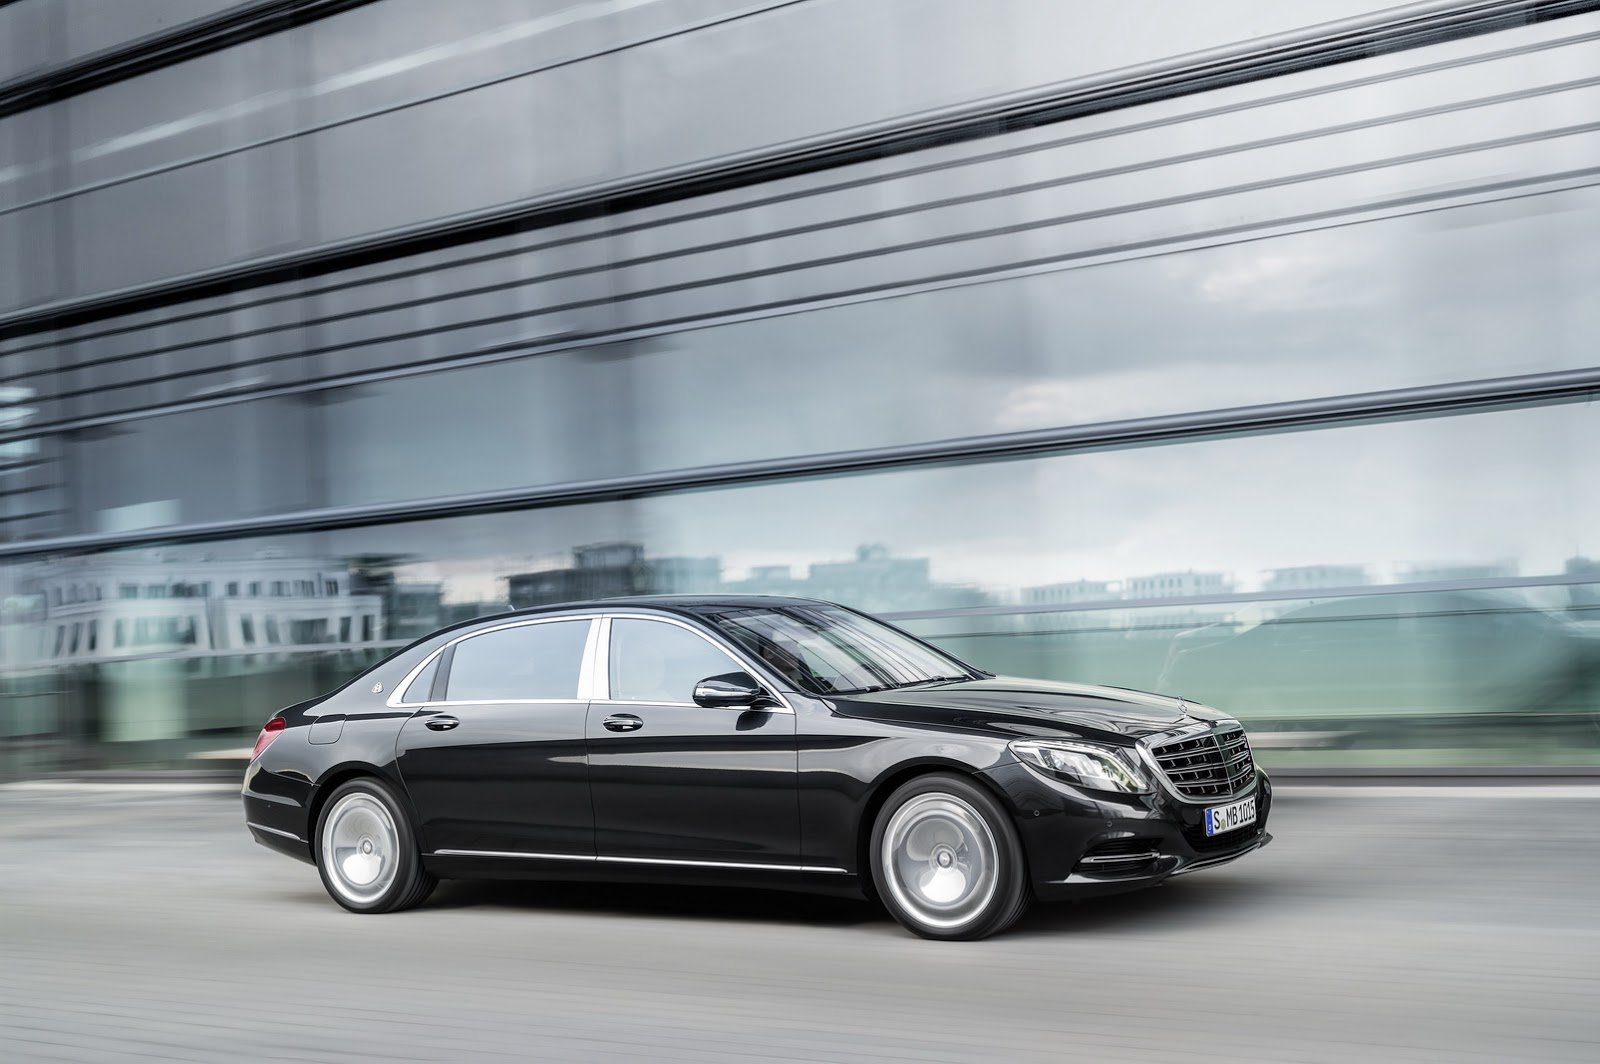 2015, Mercedes, Maybach, S class, Luxury, Limousine, Cars Wallpaper